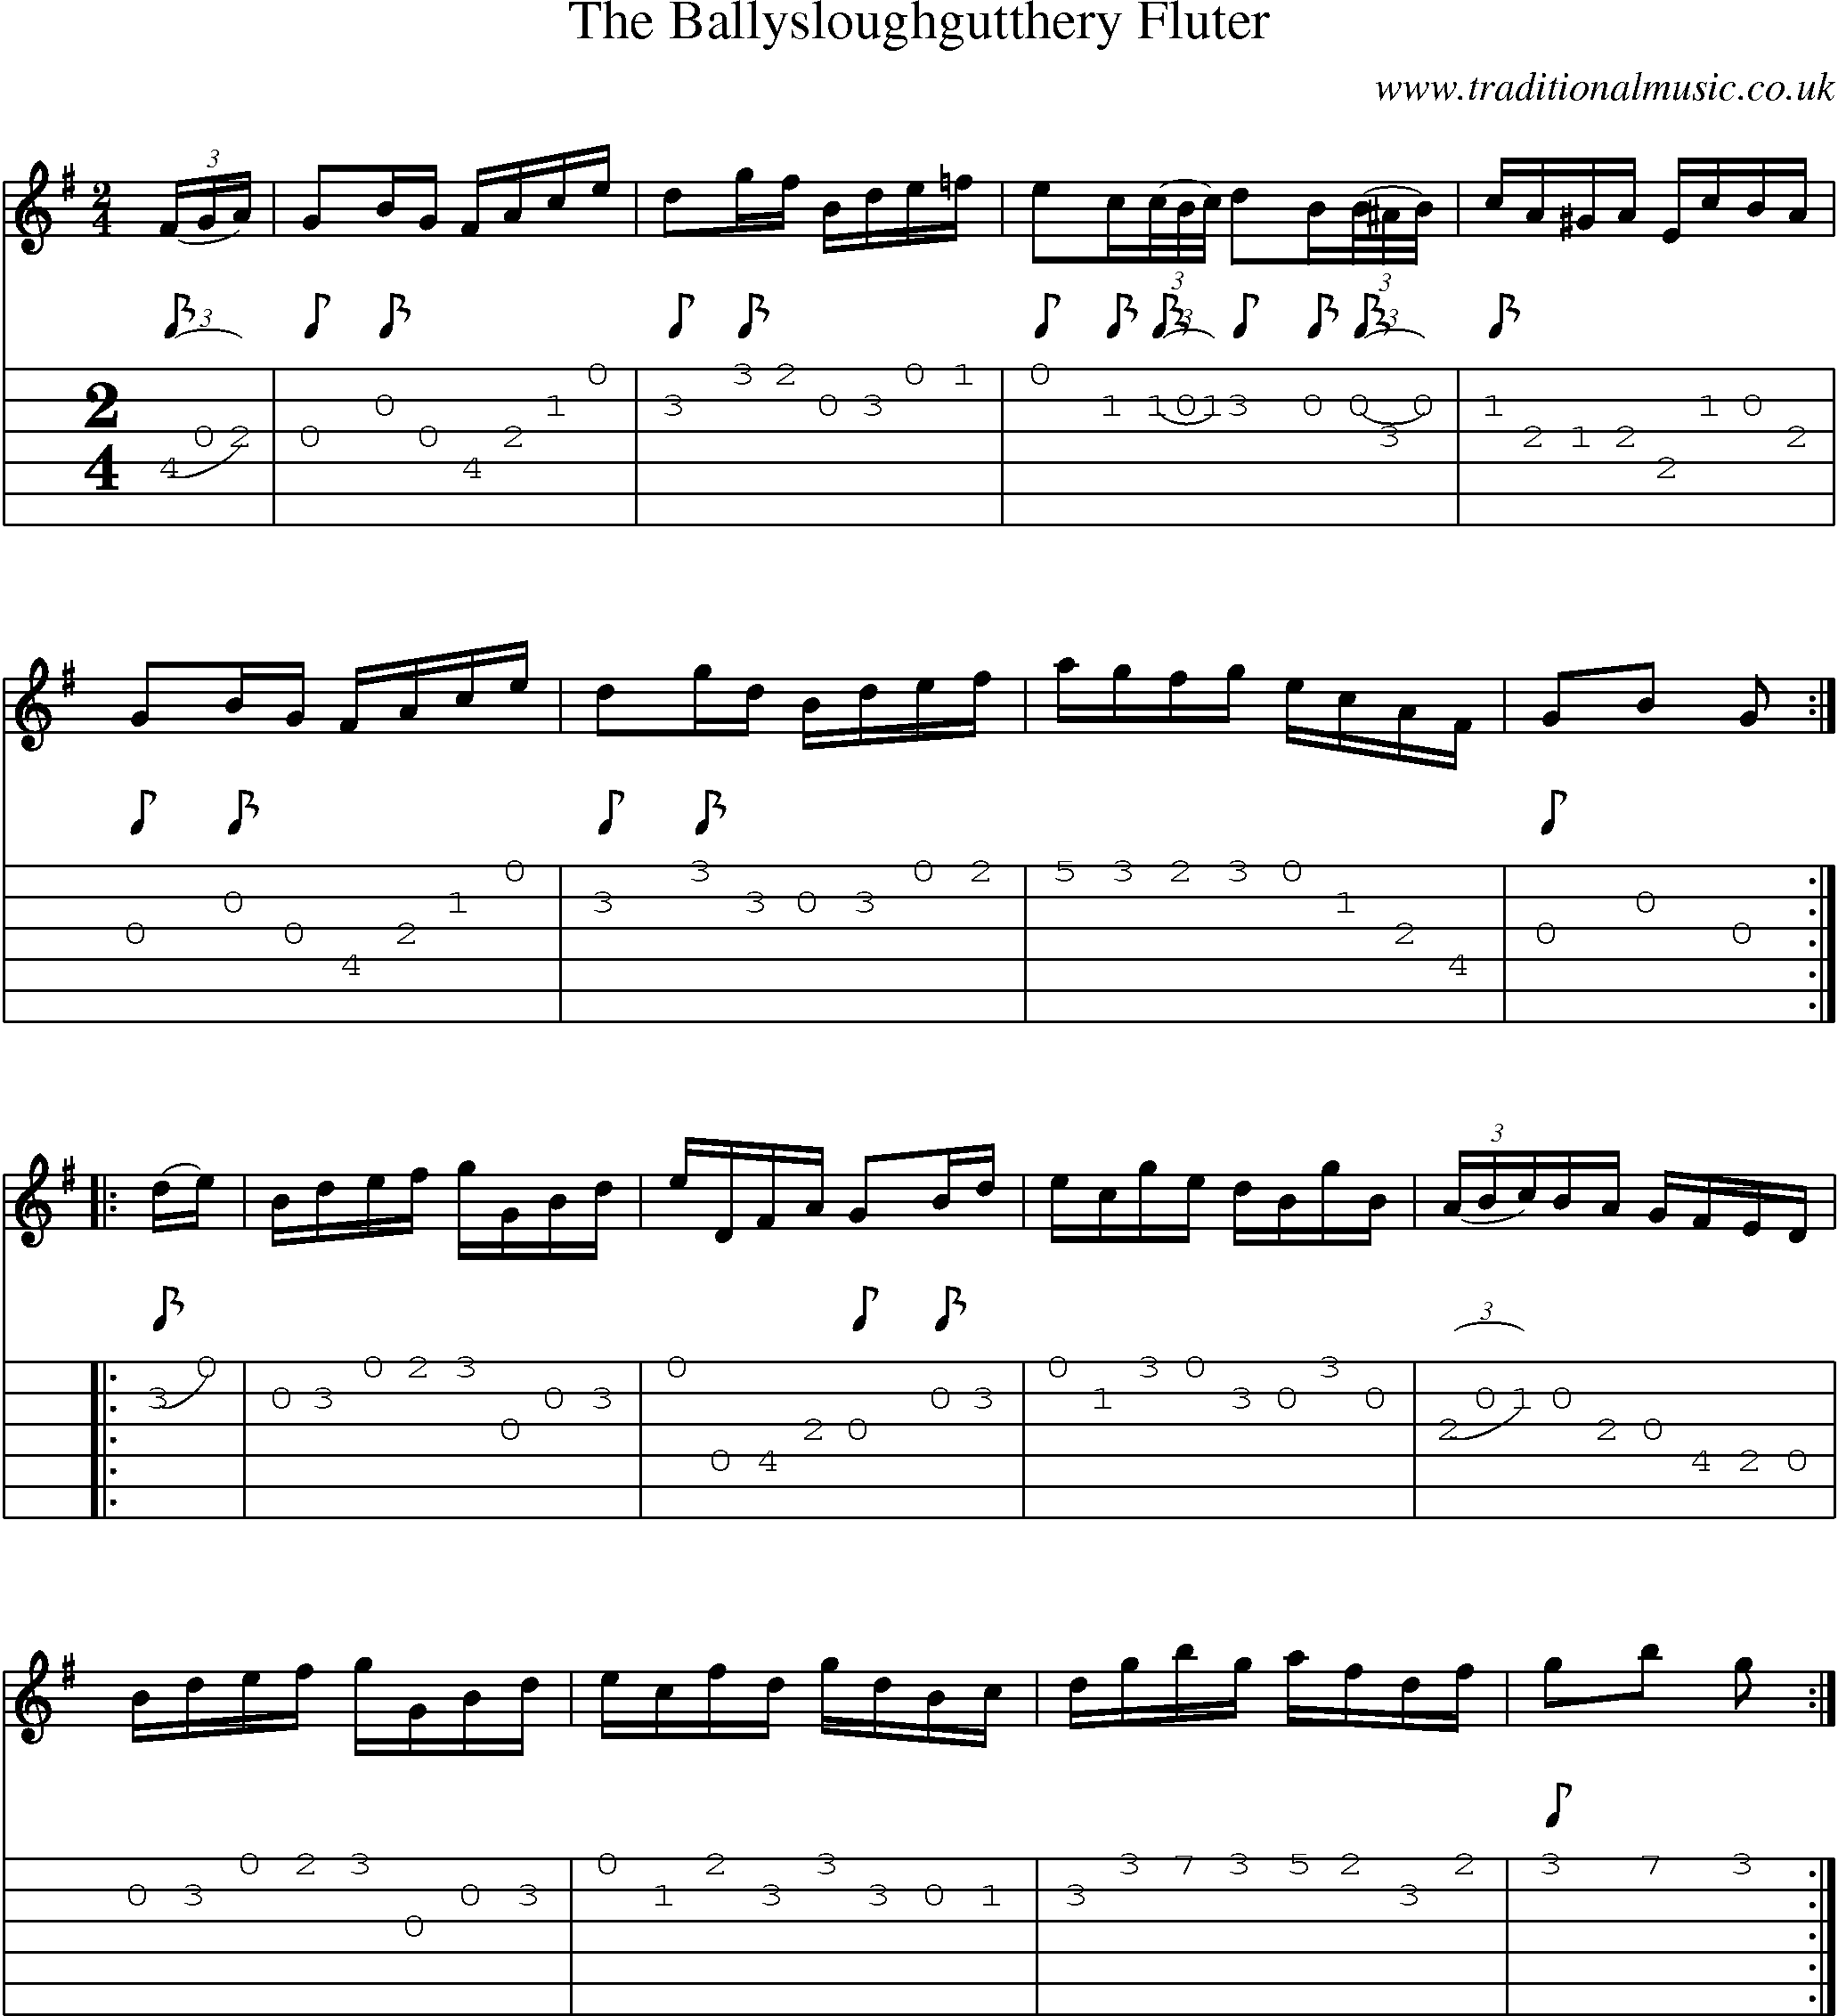 Music Score and Guitar Tabs for The Ballysloughgutthery Fluter